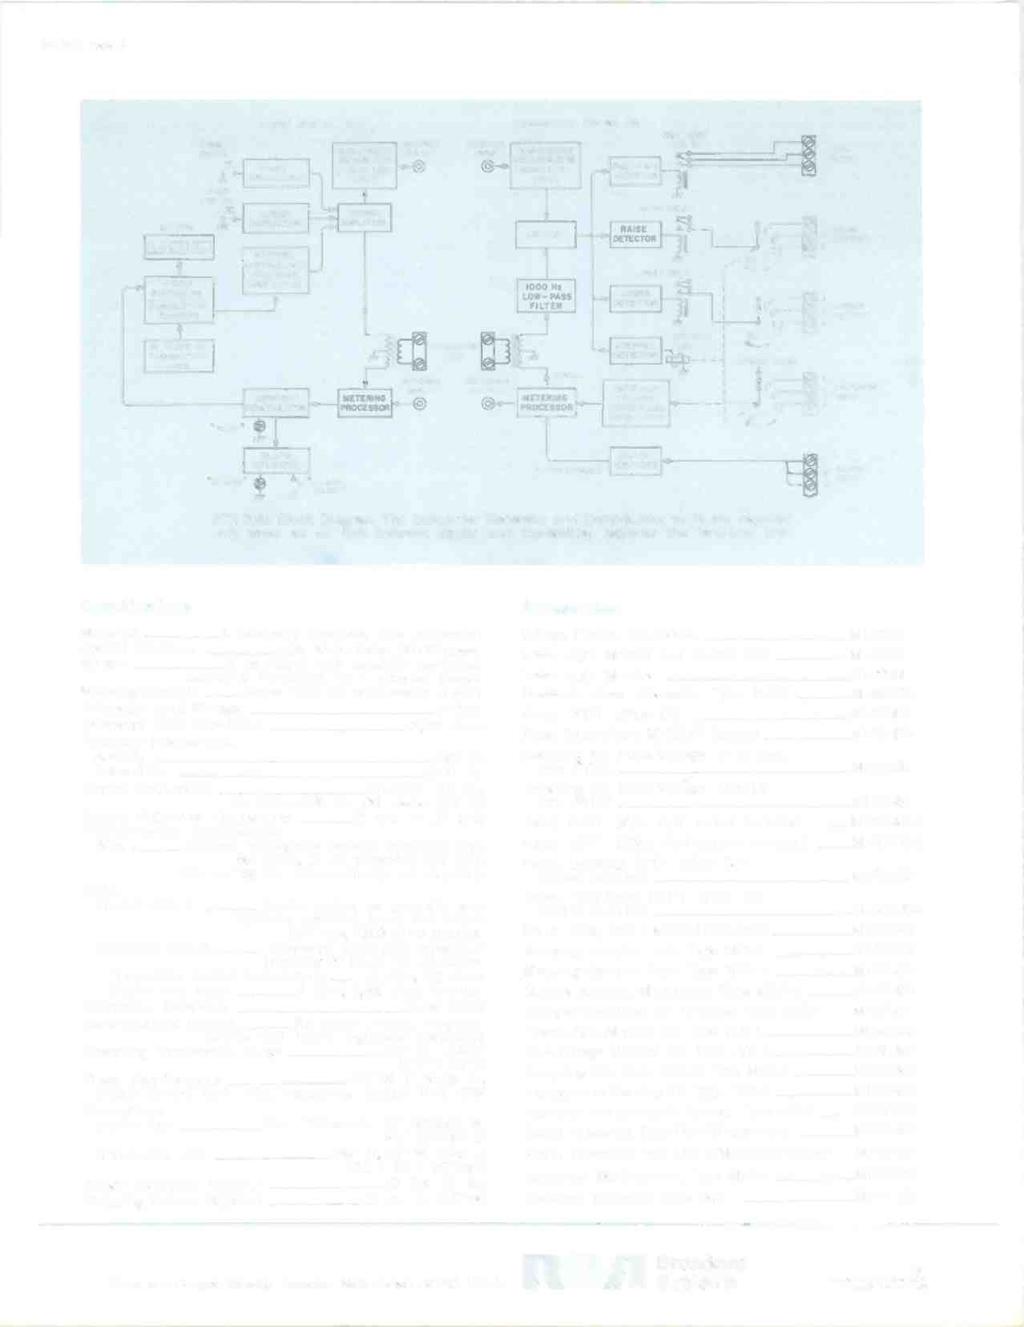 RA.3011 Page 4 RAISE SWITCH LOWER SWITCH METERS r% -a SWITCHING PUSHBUTTON ENCODER 31 POSITION PUSHBUTTON DECK "READ.